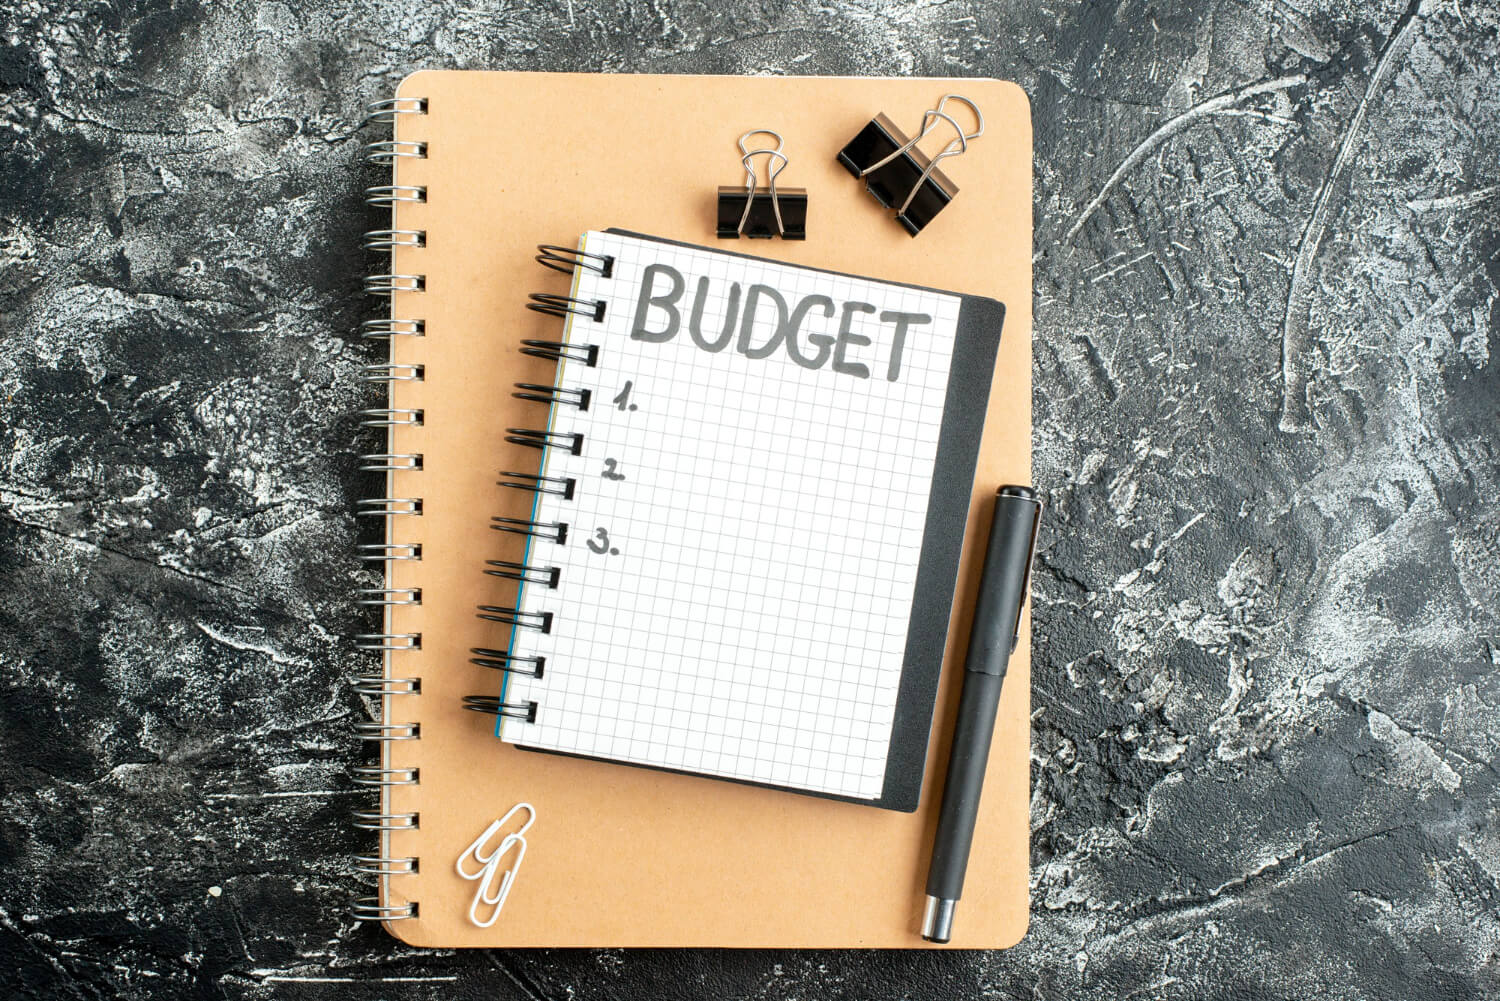 Budget written on a note on a notepad